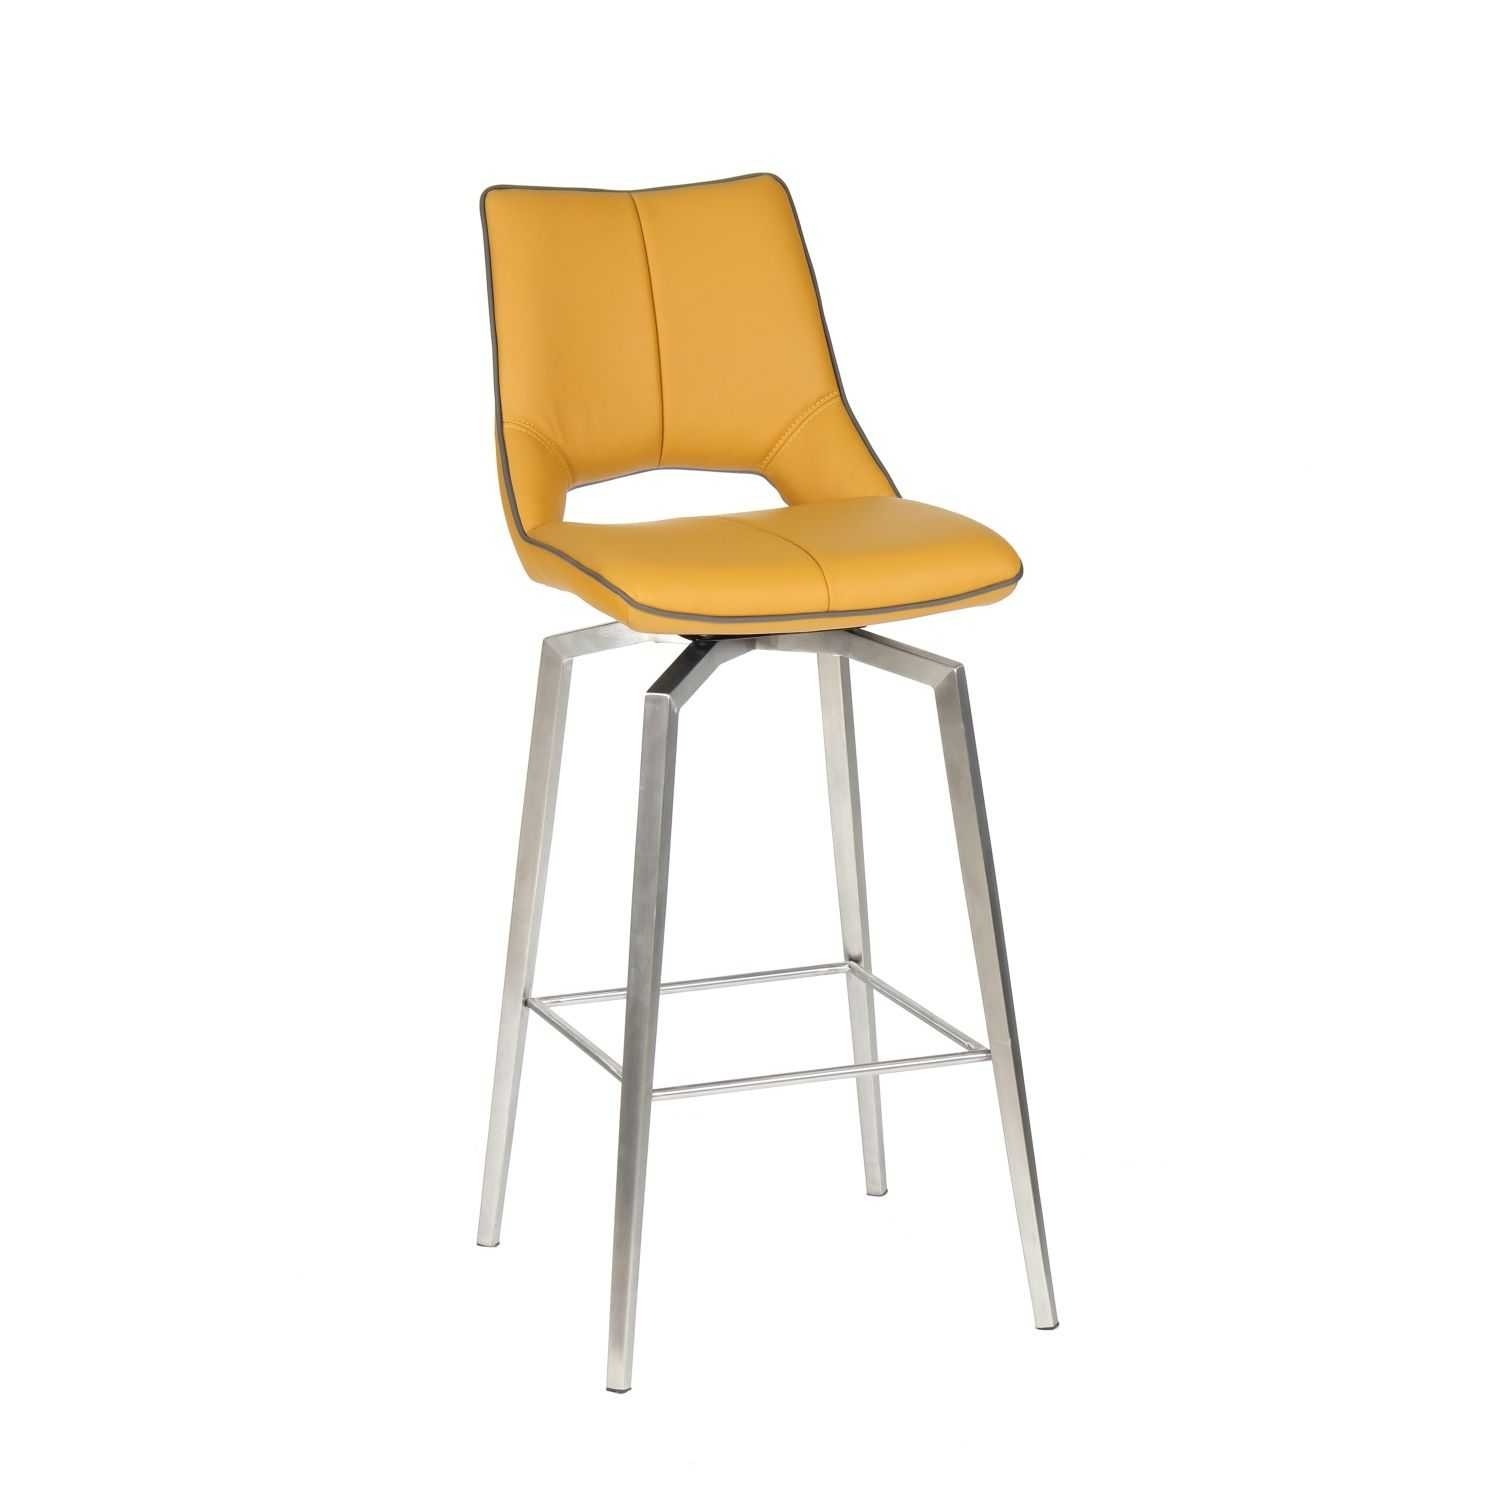 Yellow leather kitchen bar stool stainless steel frame